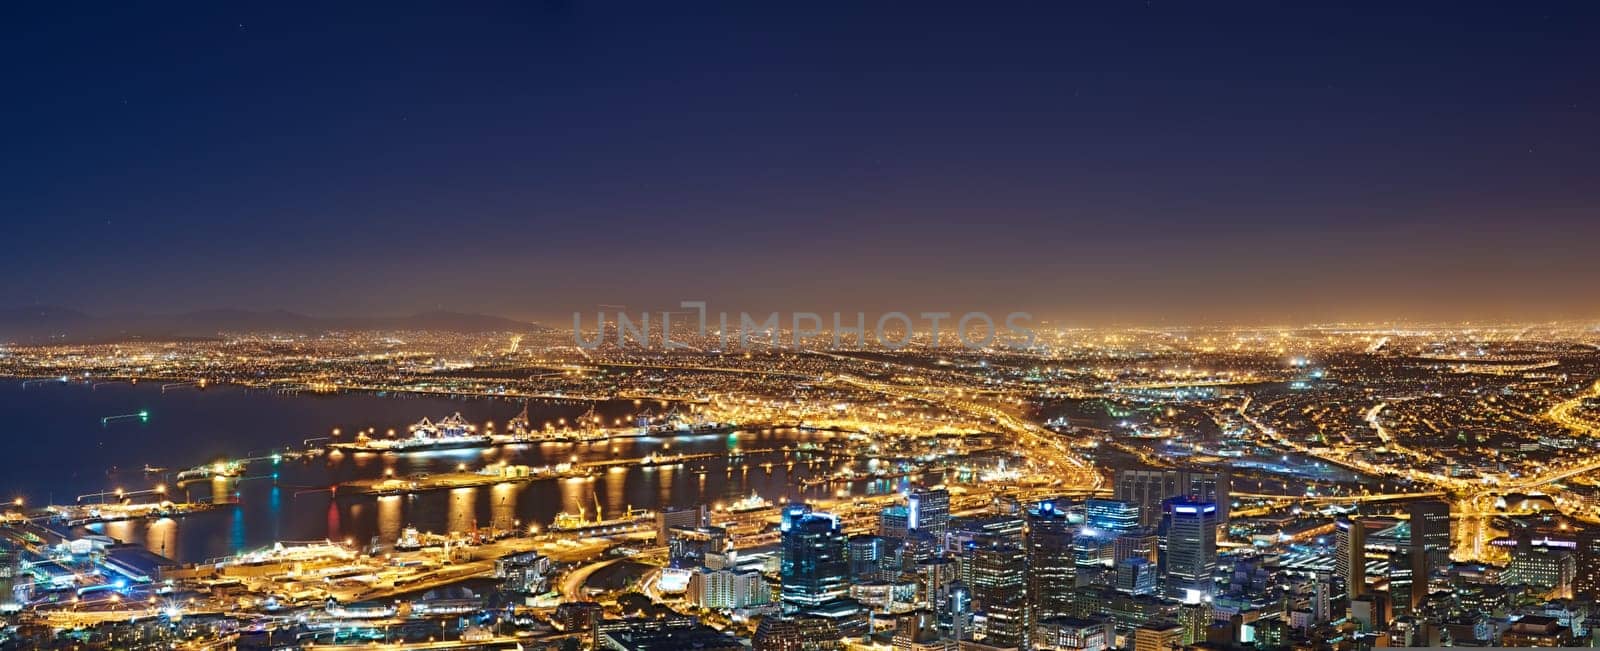 Lights, buildings and drone of the city at night with urban development, sea water and streets. Dark, travel and aerial view of outdoor residential architecture of downtown with a harbour in evening